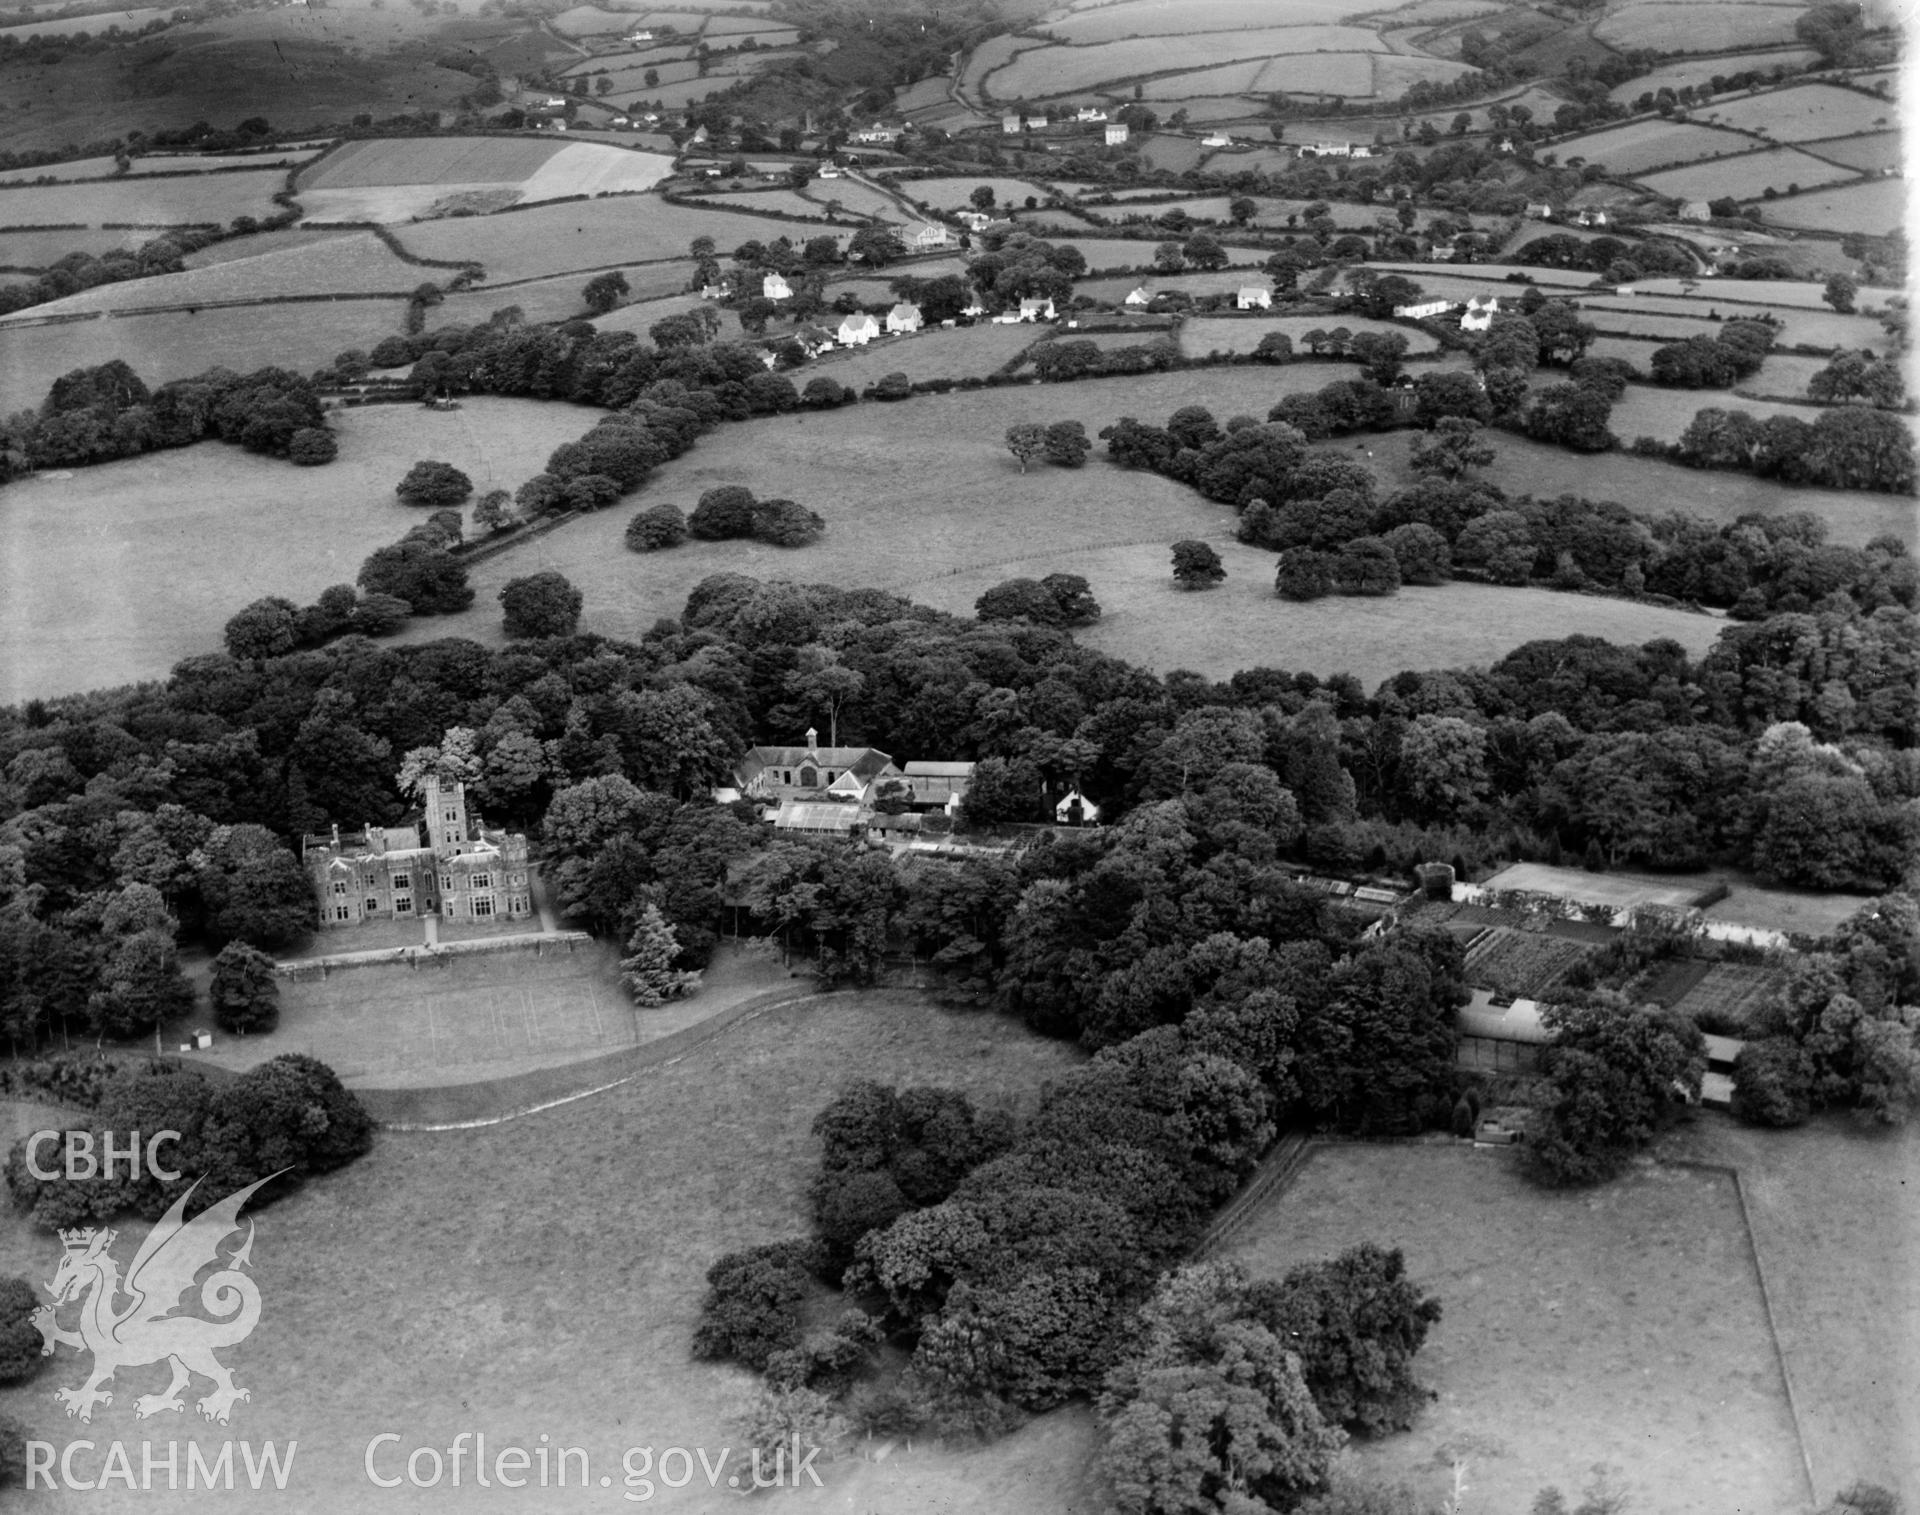 View of Hean Castle and grounds, Saundersfoot, oblique aerial view. 5?x4? black and white glass plate negative.